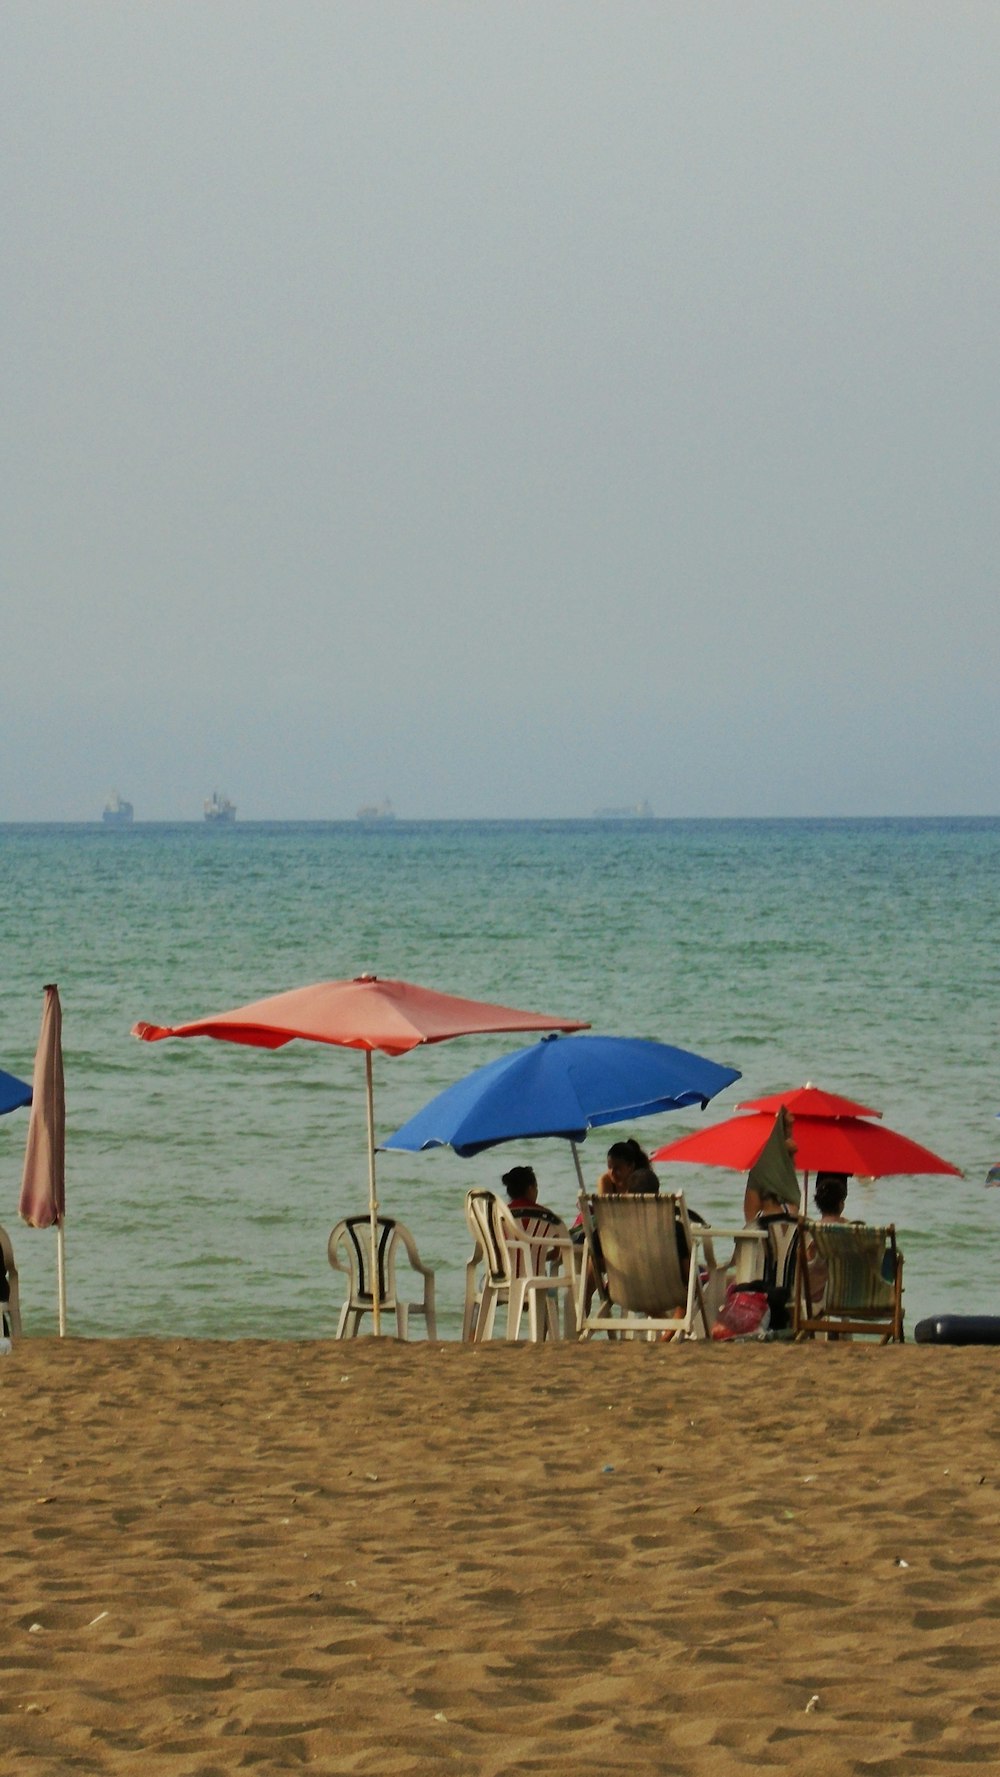 people sitting on beach chairs under red umbrella during daytime